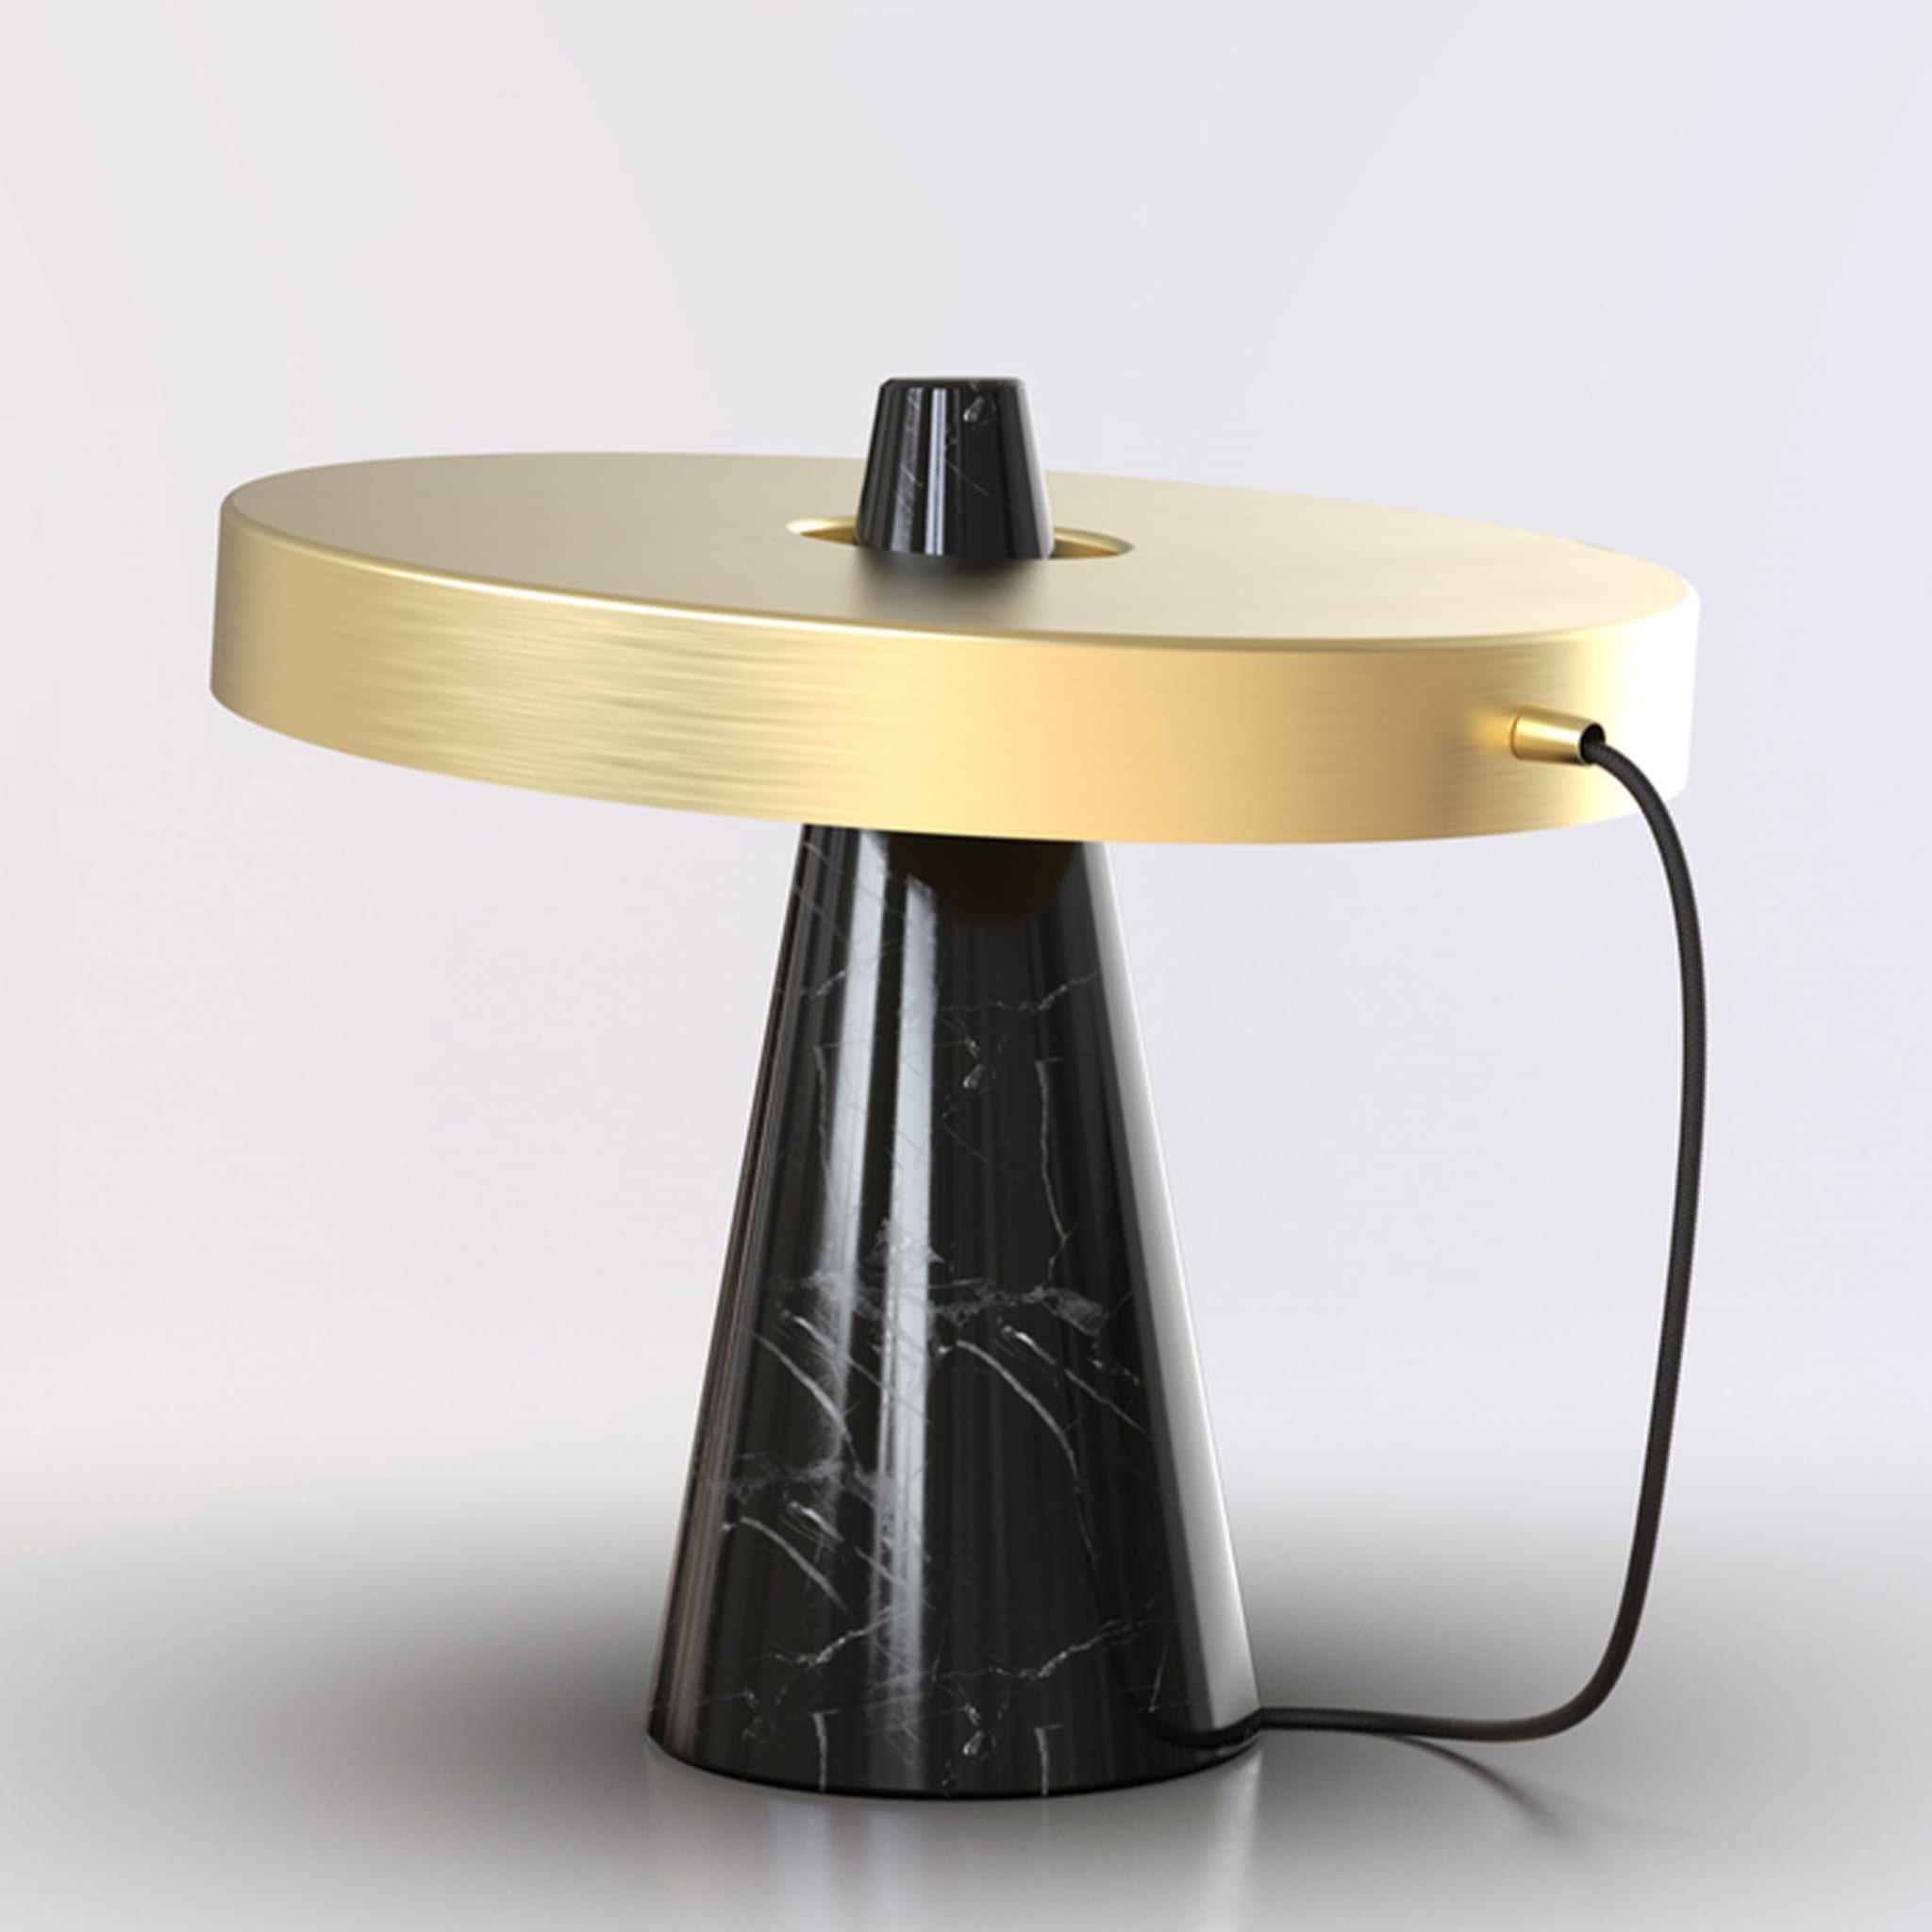 ED039 Black Stone and Brass Table Lamp - Alternative view 1